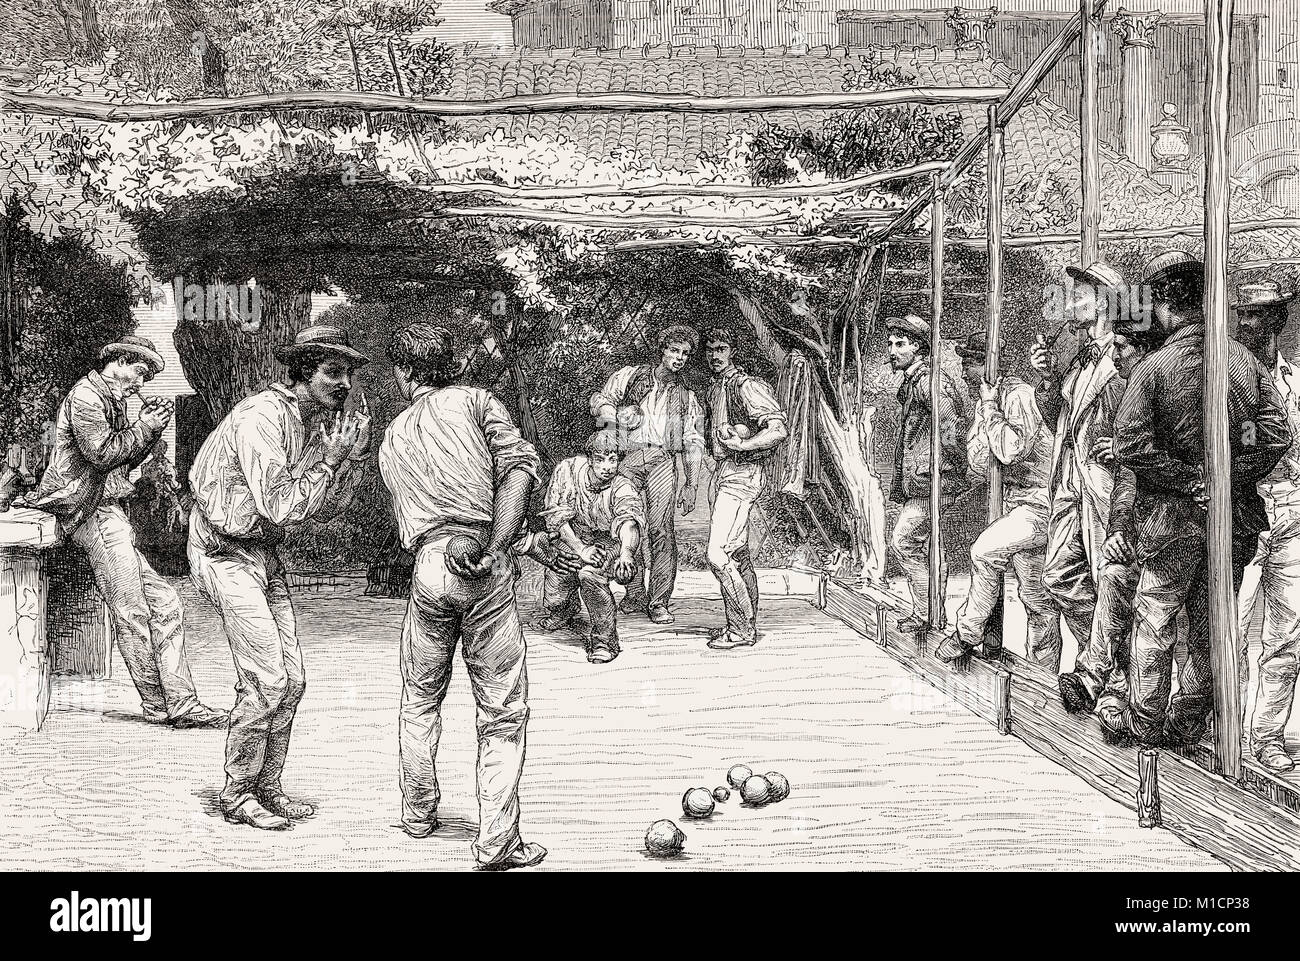 Men playing Bocce, Rome, Italy, 19th Century Stock Photo